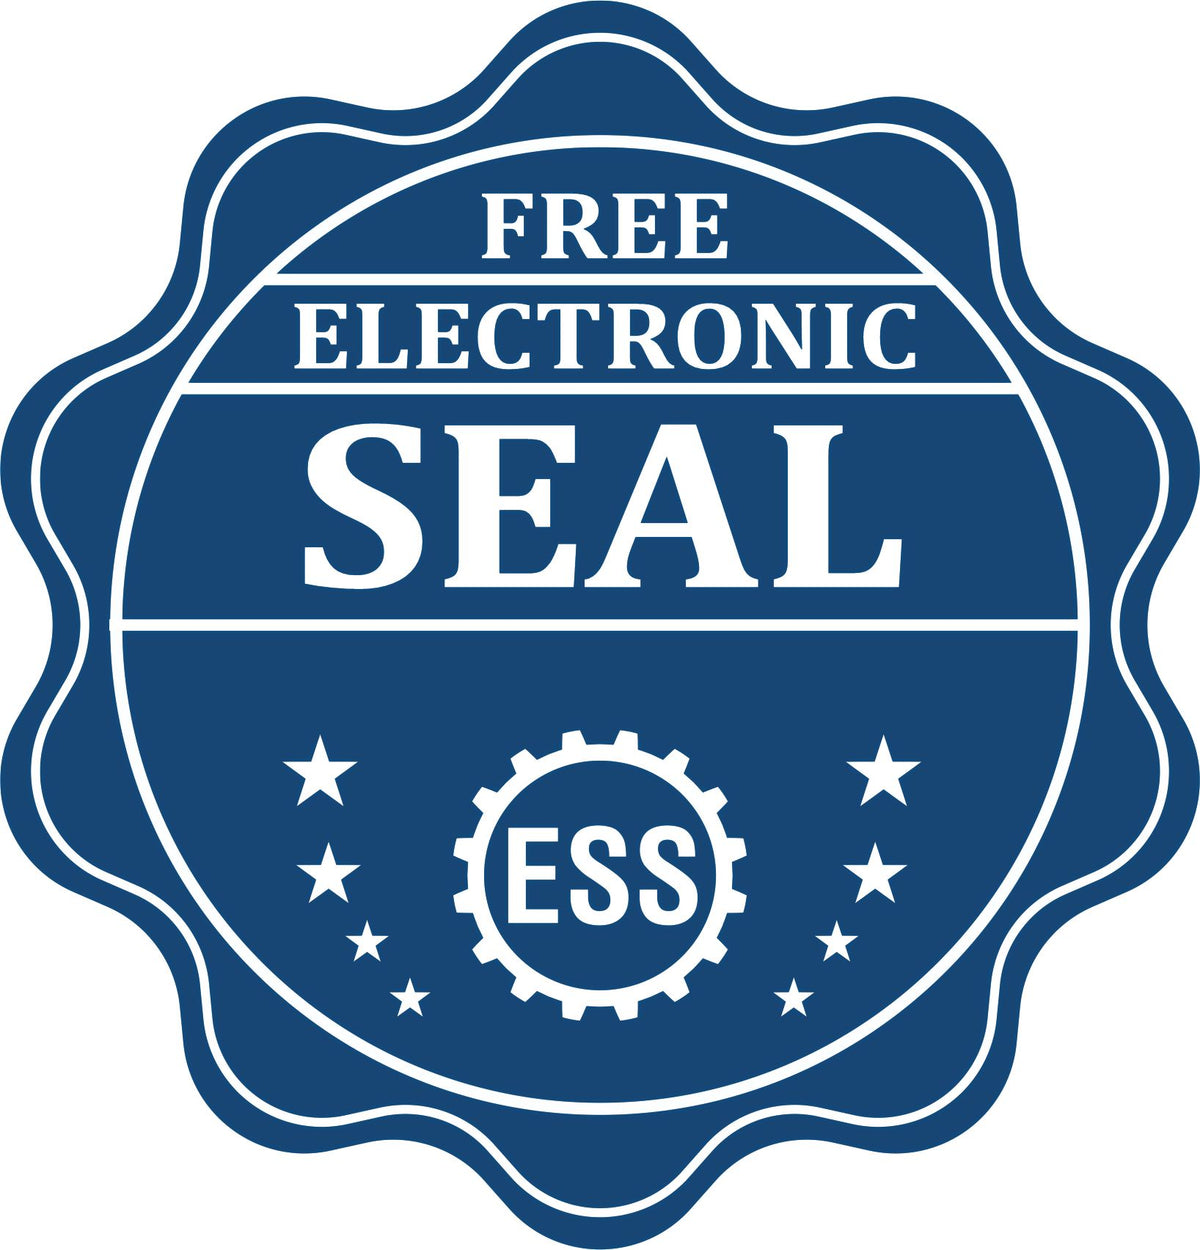 A badge showing a free electronic seal for the Slim Pre-Inked Rhode Island Landscape Architect Seal Stamp with stars and the ESS gear on the emblem.